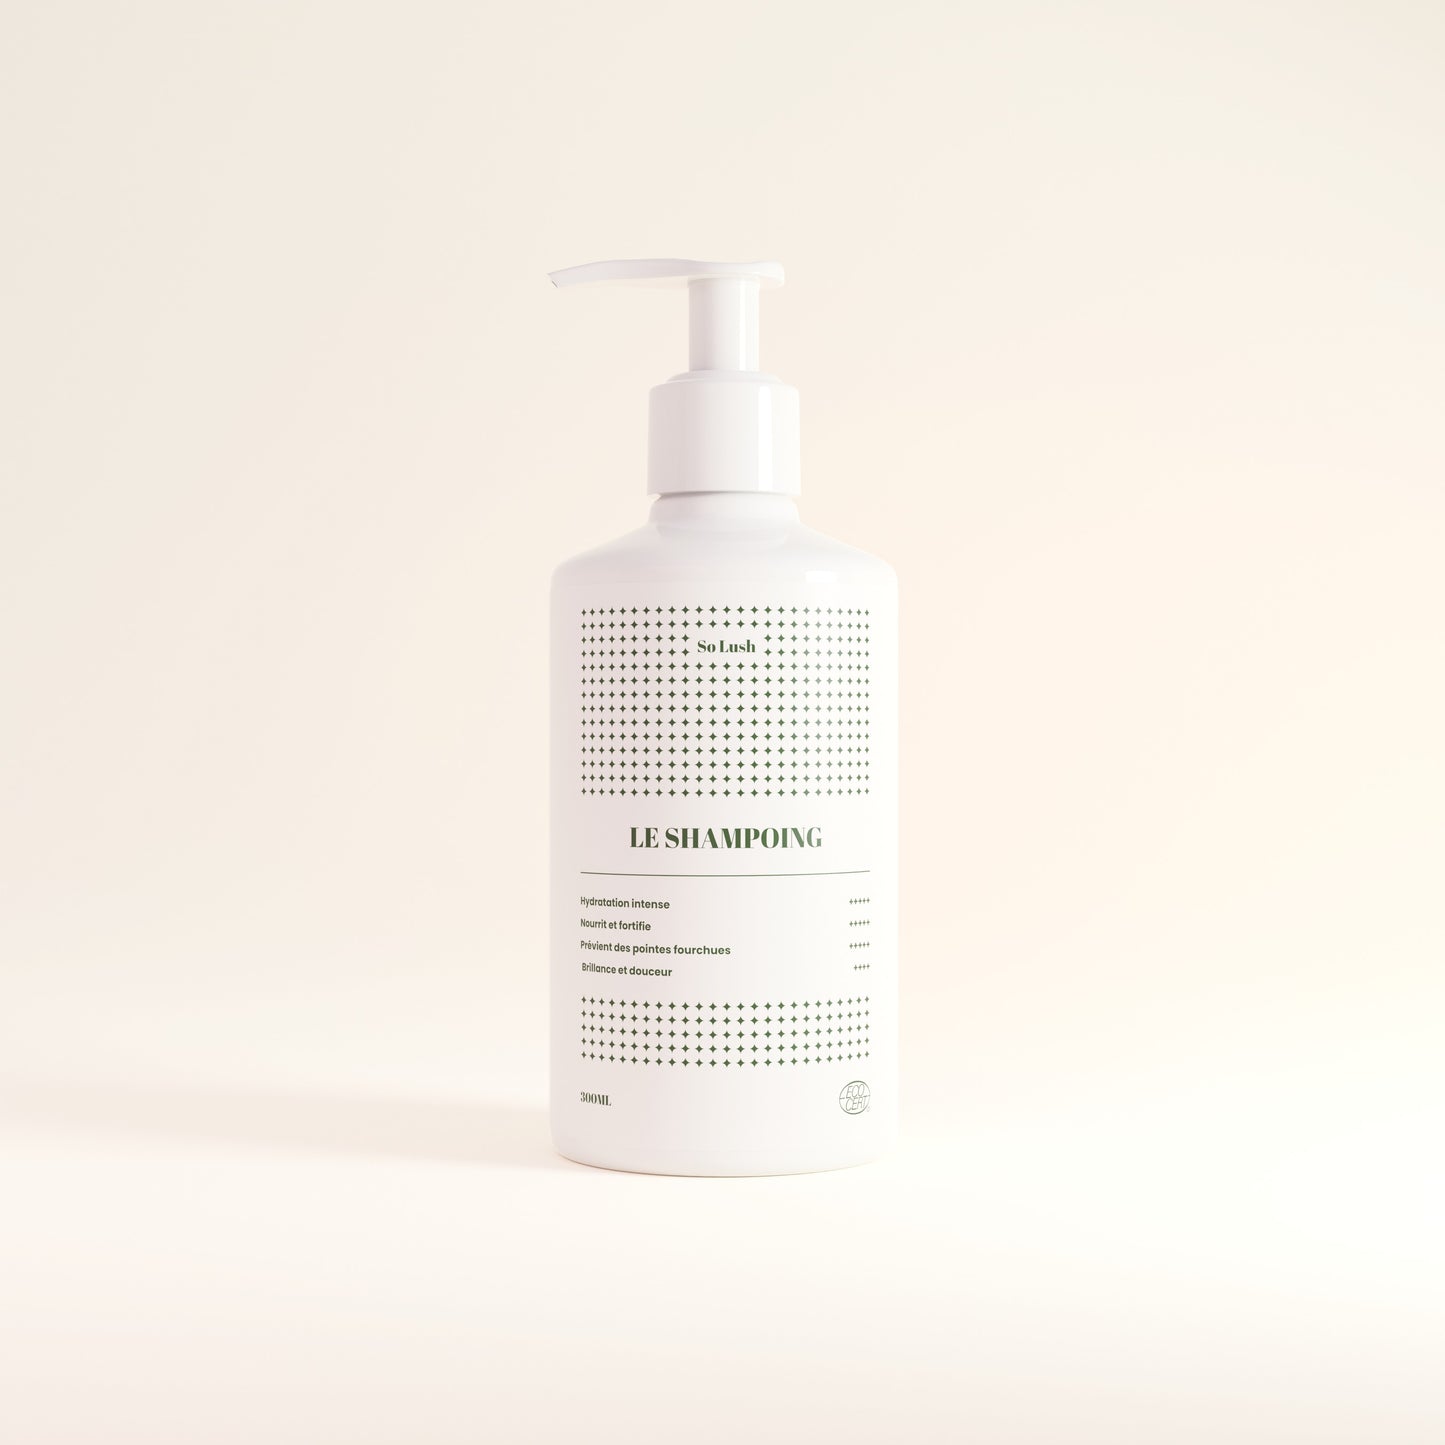 Le shampoing Fortifiant BIO